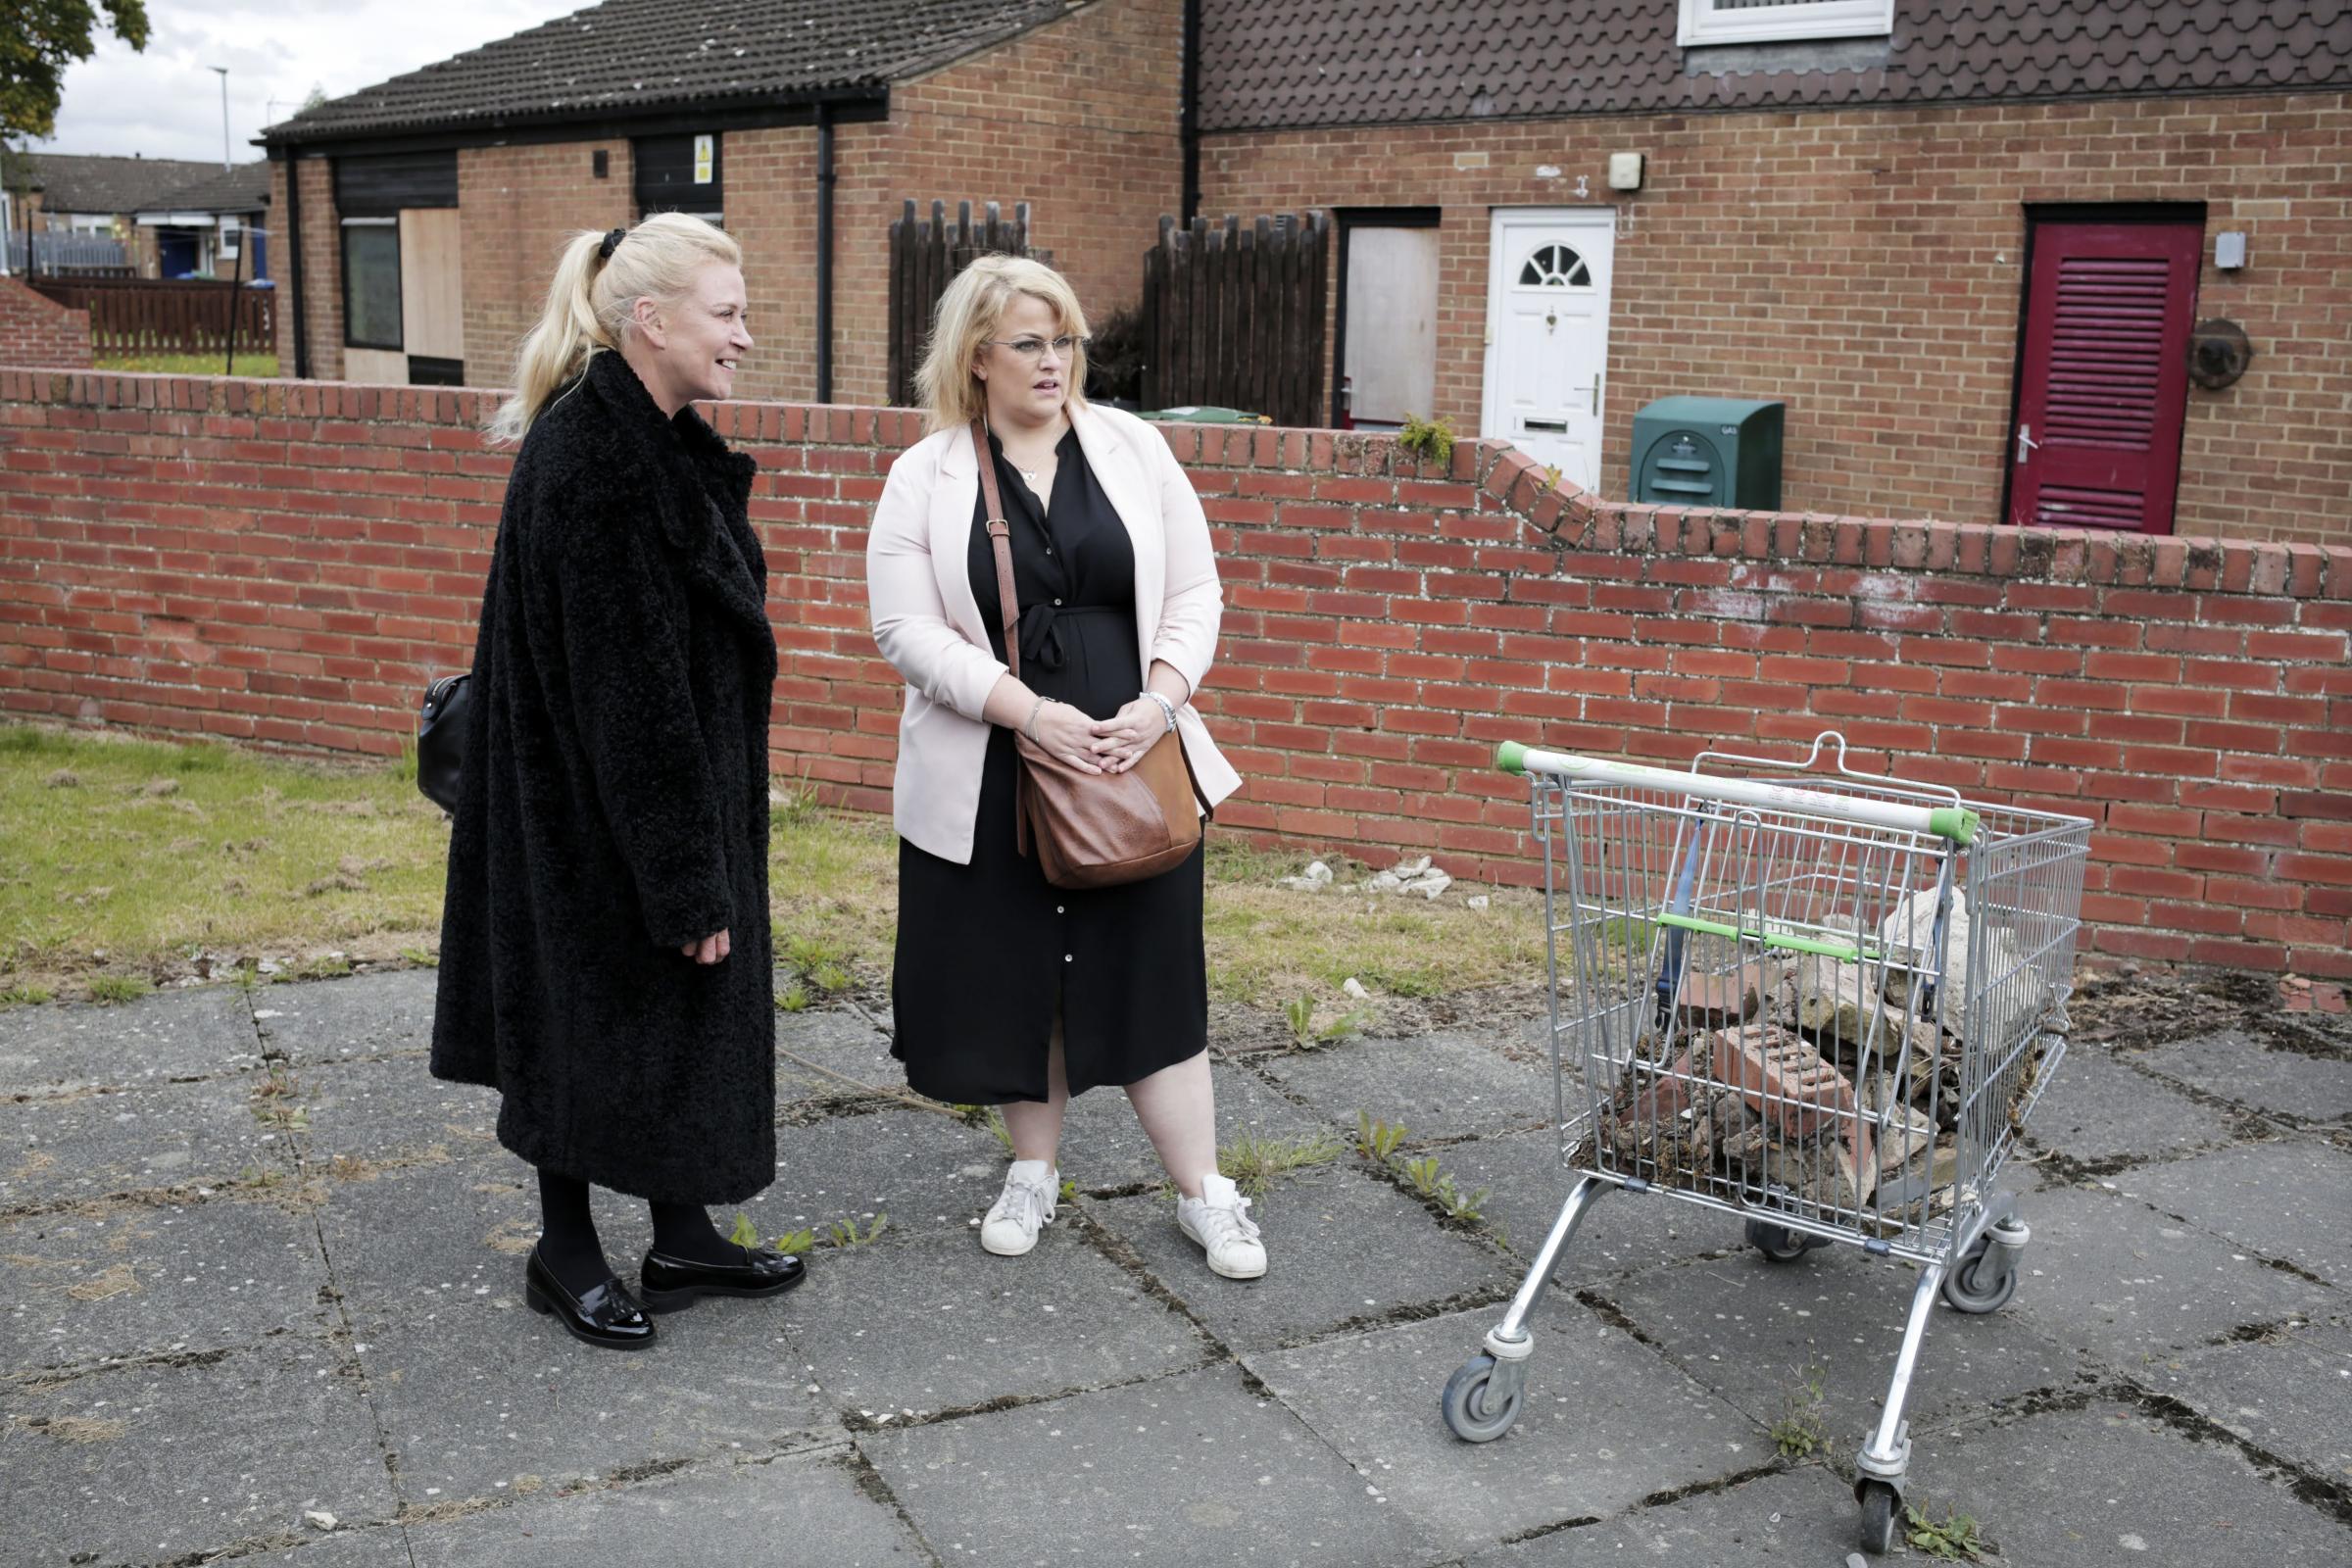 From left, councillors Cathy Hunt and Joanne Howey on the Henknowle Estate in Bishop Auckland. Photograph: Stuart Boulton.